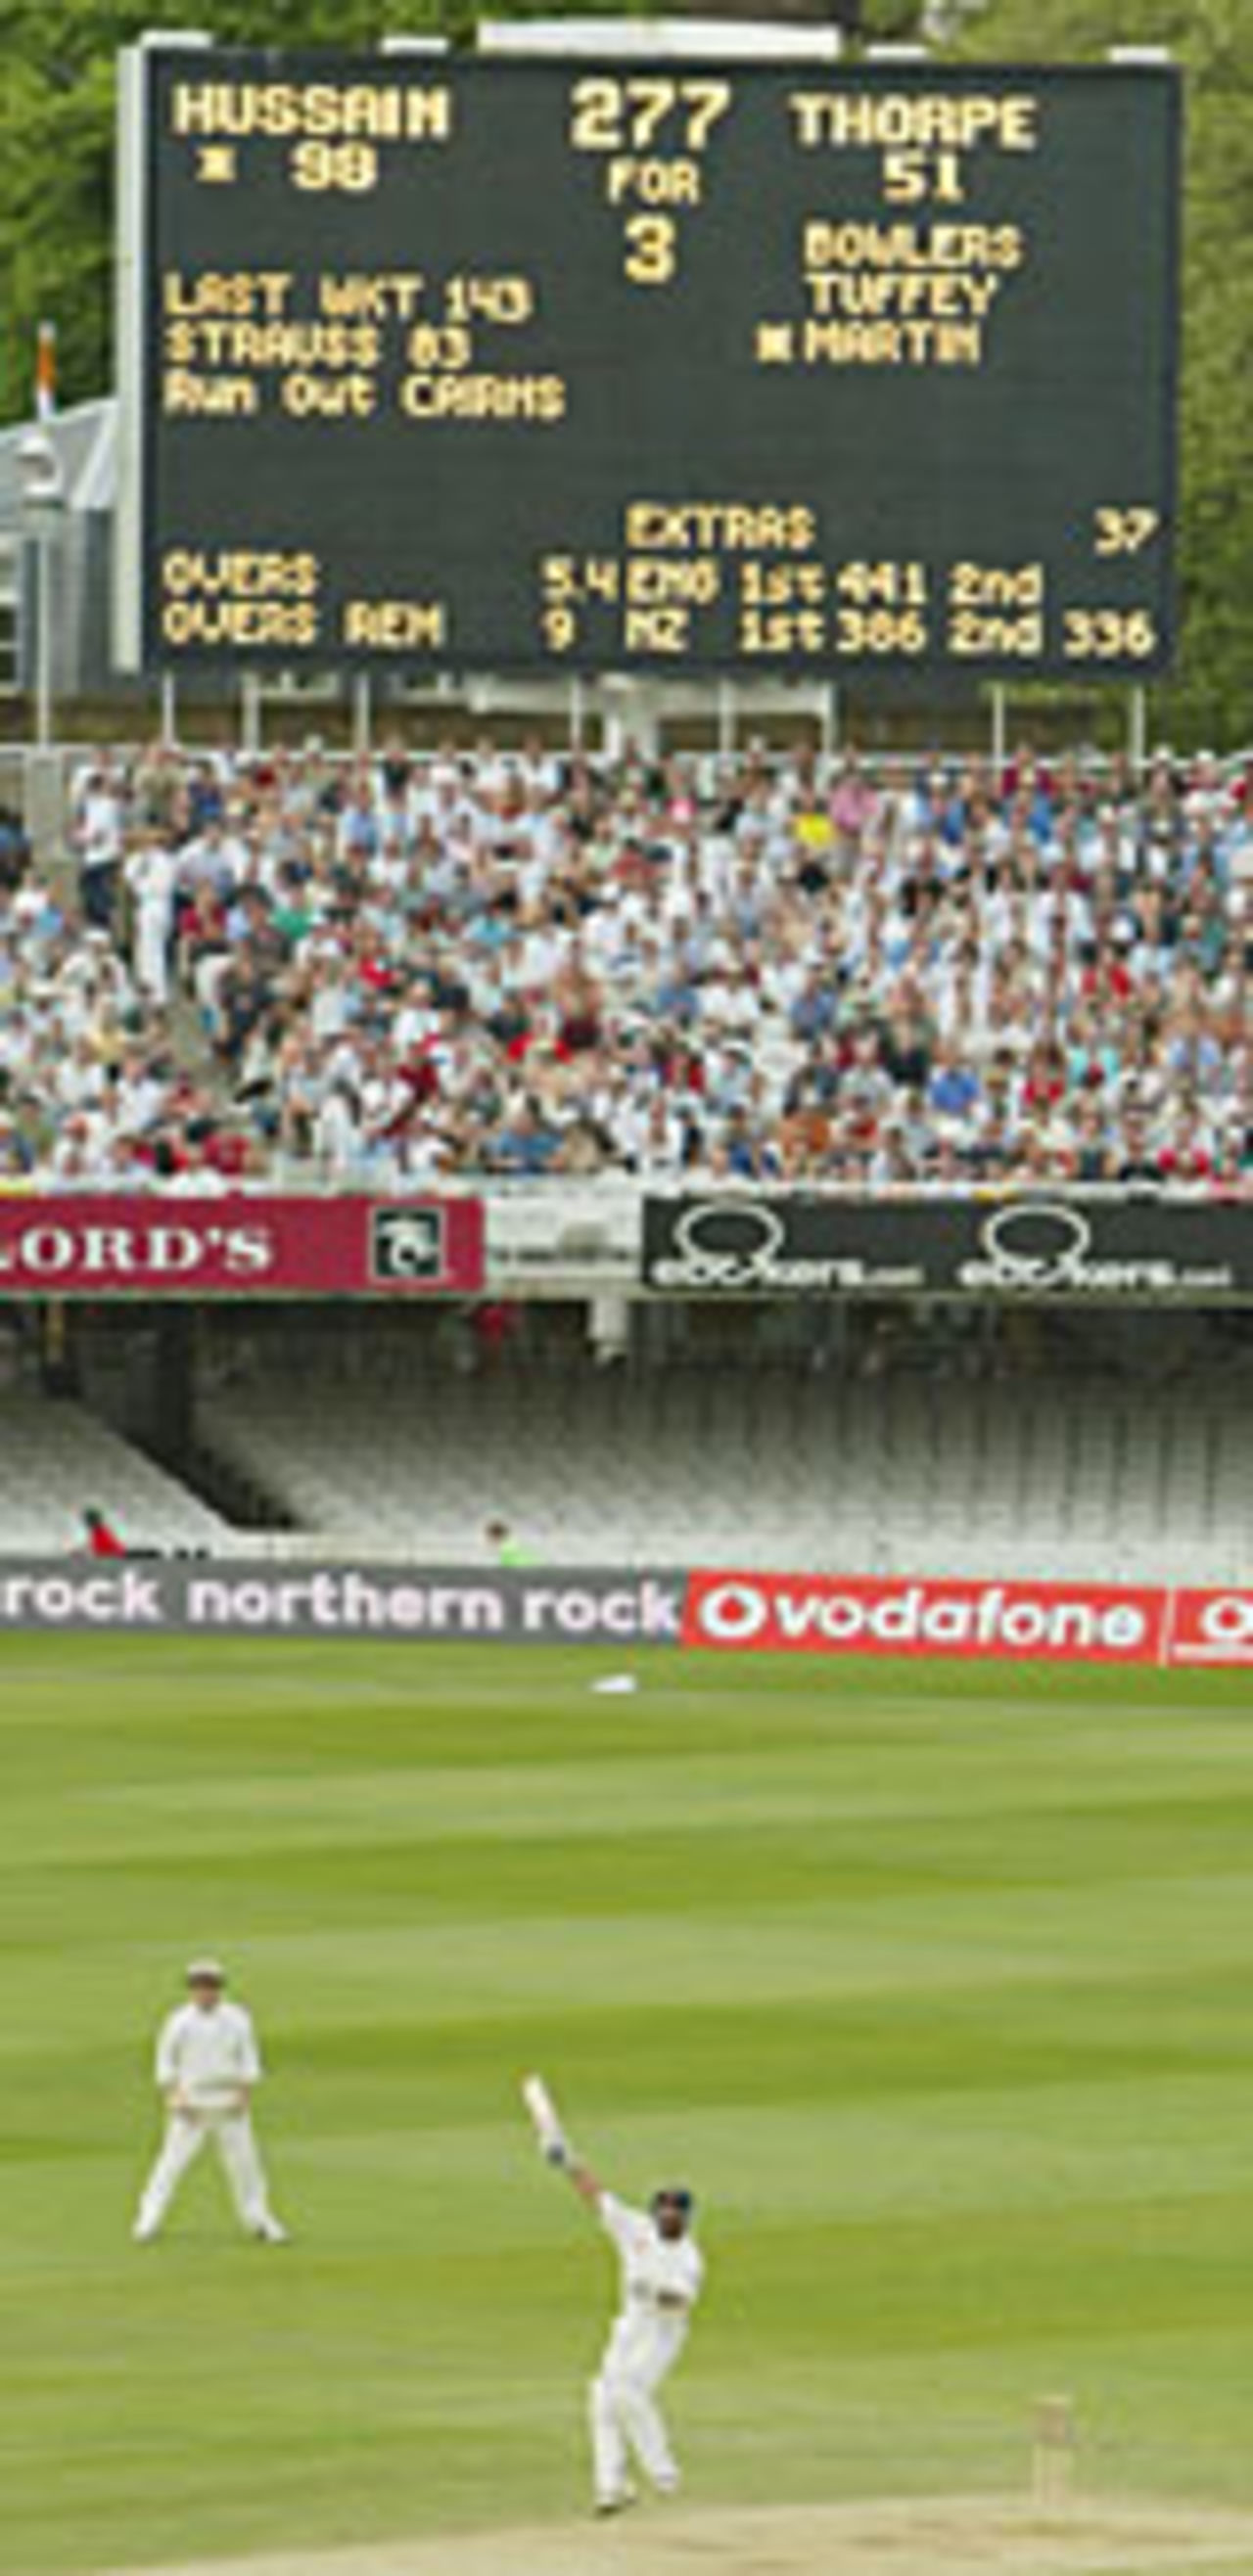 Nasser Hussain celebrates his century, England v New Zealand, 1st Test, Lord's, May 24, 2004